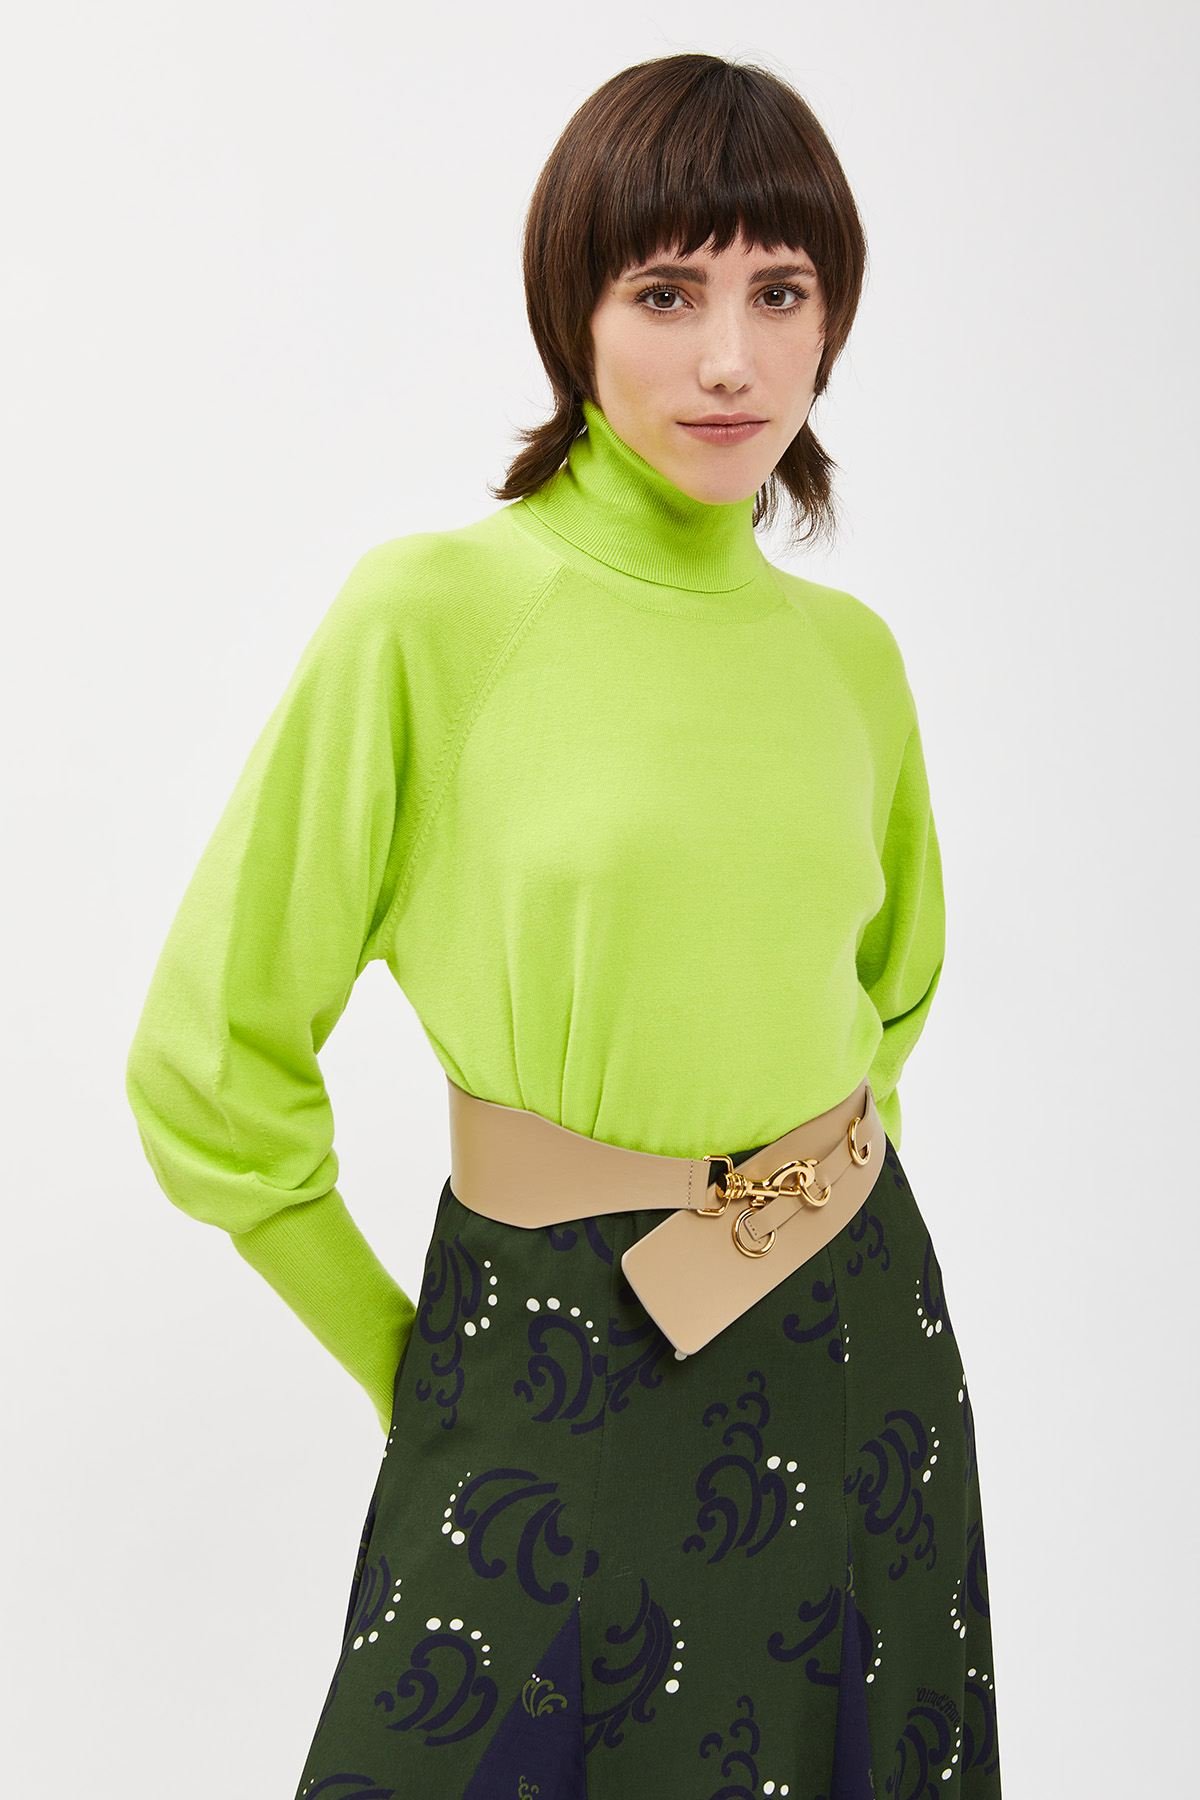 Jumper with puffed sleeves.